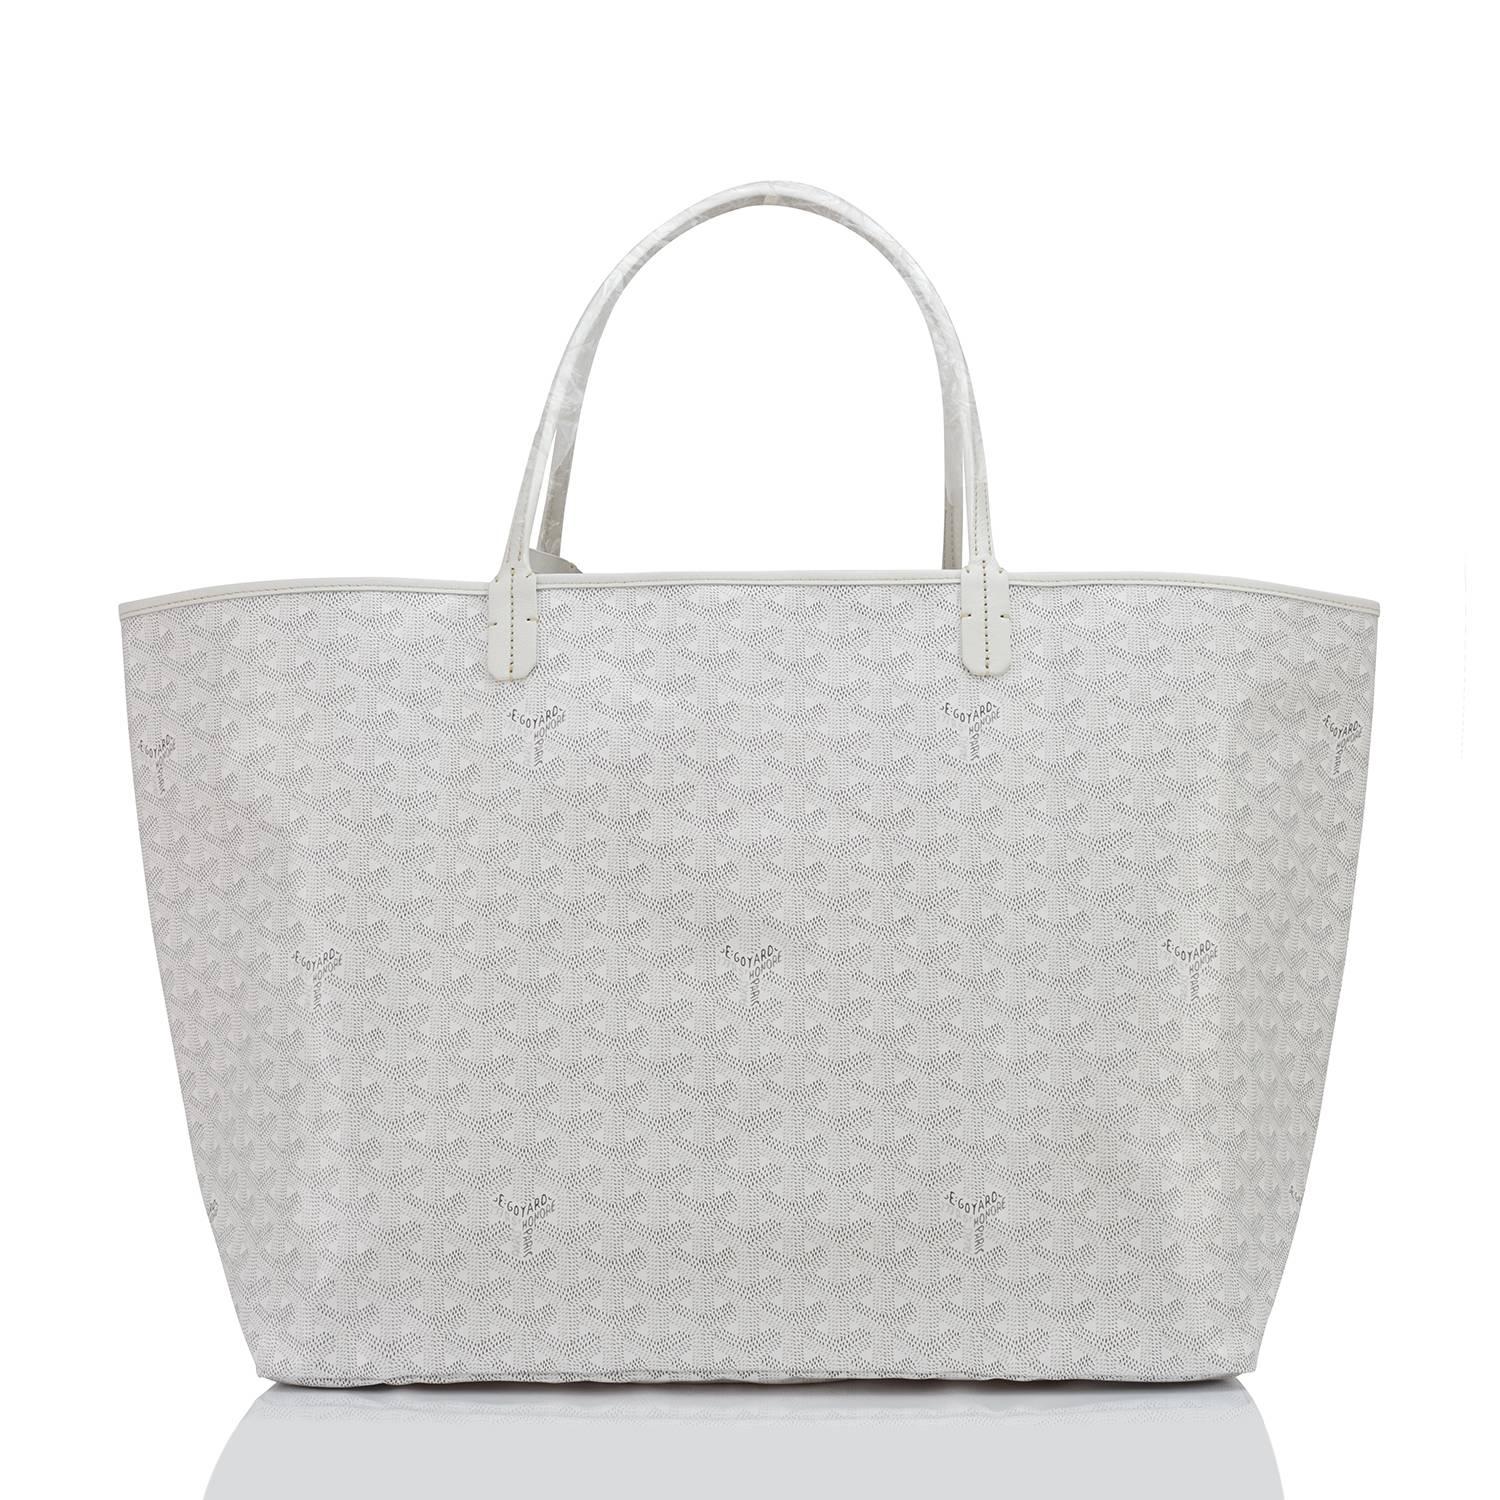 Goyard White St Louis GM Chevron Leather Canvas Tote Bag NEW
Brand New. Store Fresh. Pristine Condition (with plastic on handles) 
Perfect gift! Comes with yellow Goyard sleeper and inner organizational pochette. 
This is the cult-favorite Goyard